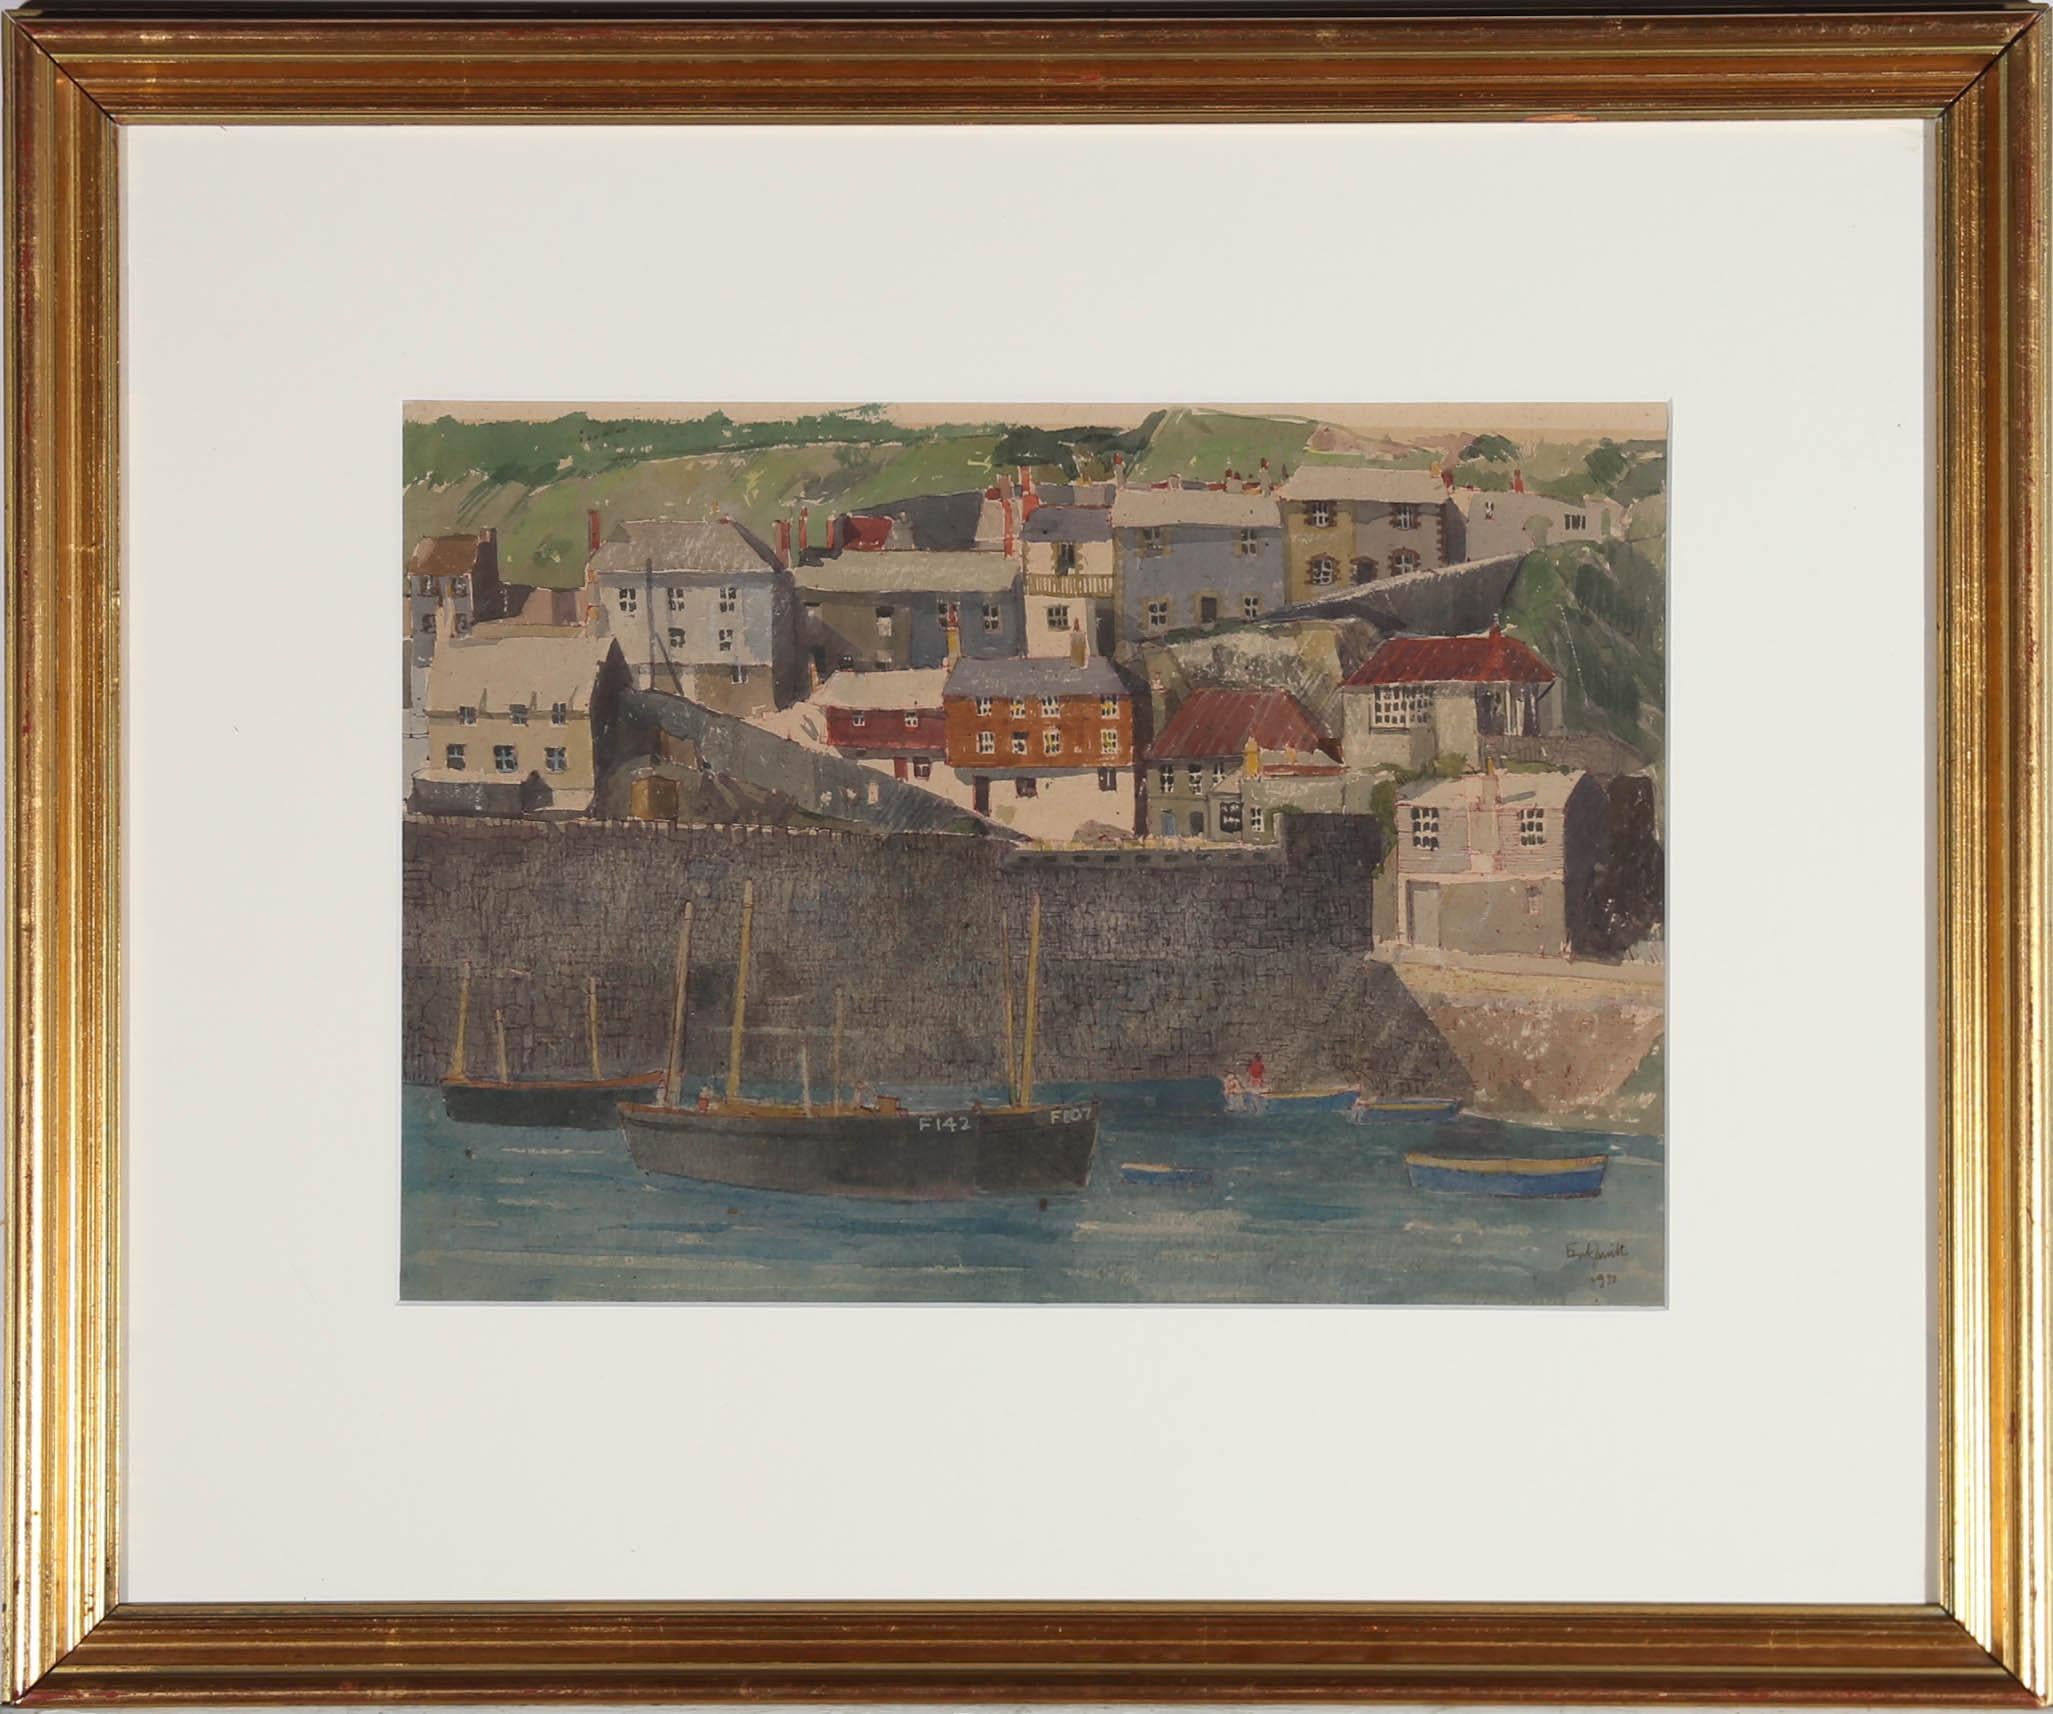 This charming watercolour study by British artist Erik Smith (1914-1972), features a delightful fishing town with stacked coastal properties lining a quiet Cornish harbour. The artist's fine ink details and controlled application of paint brings an